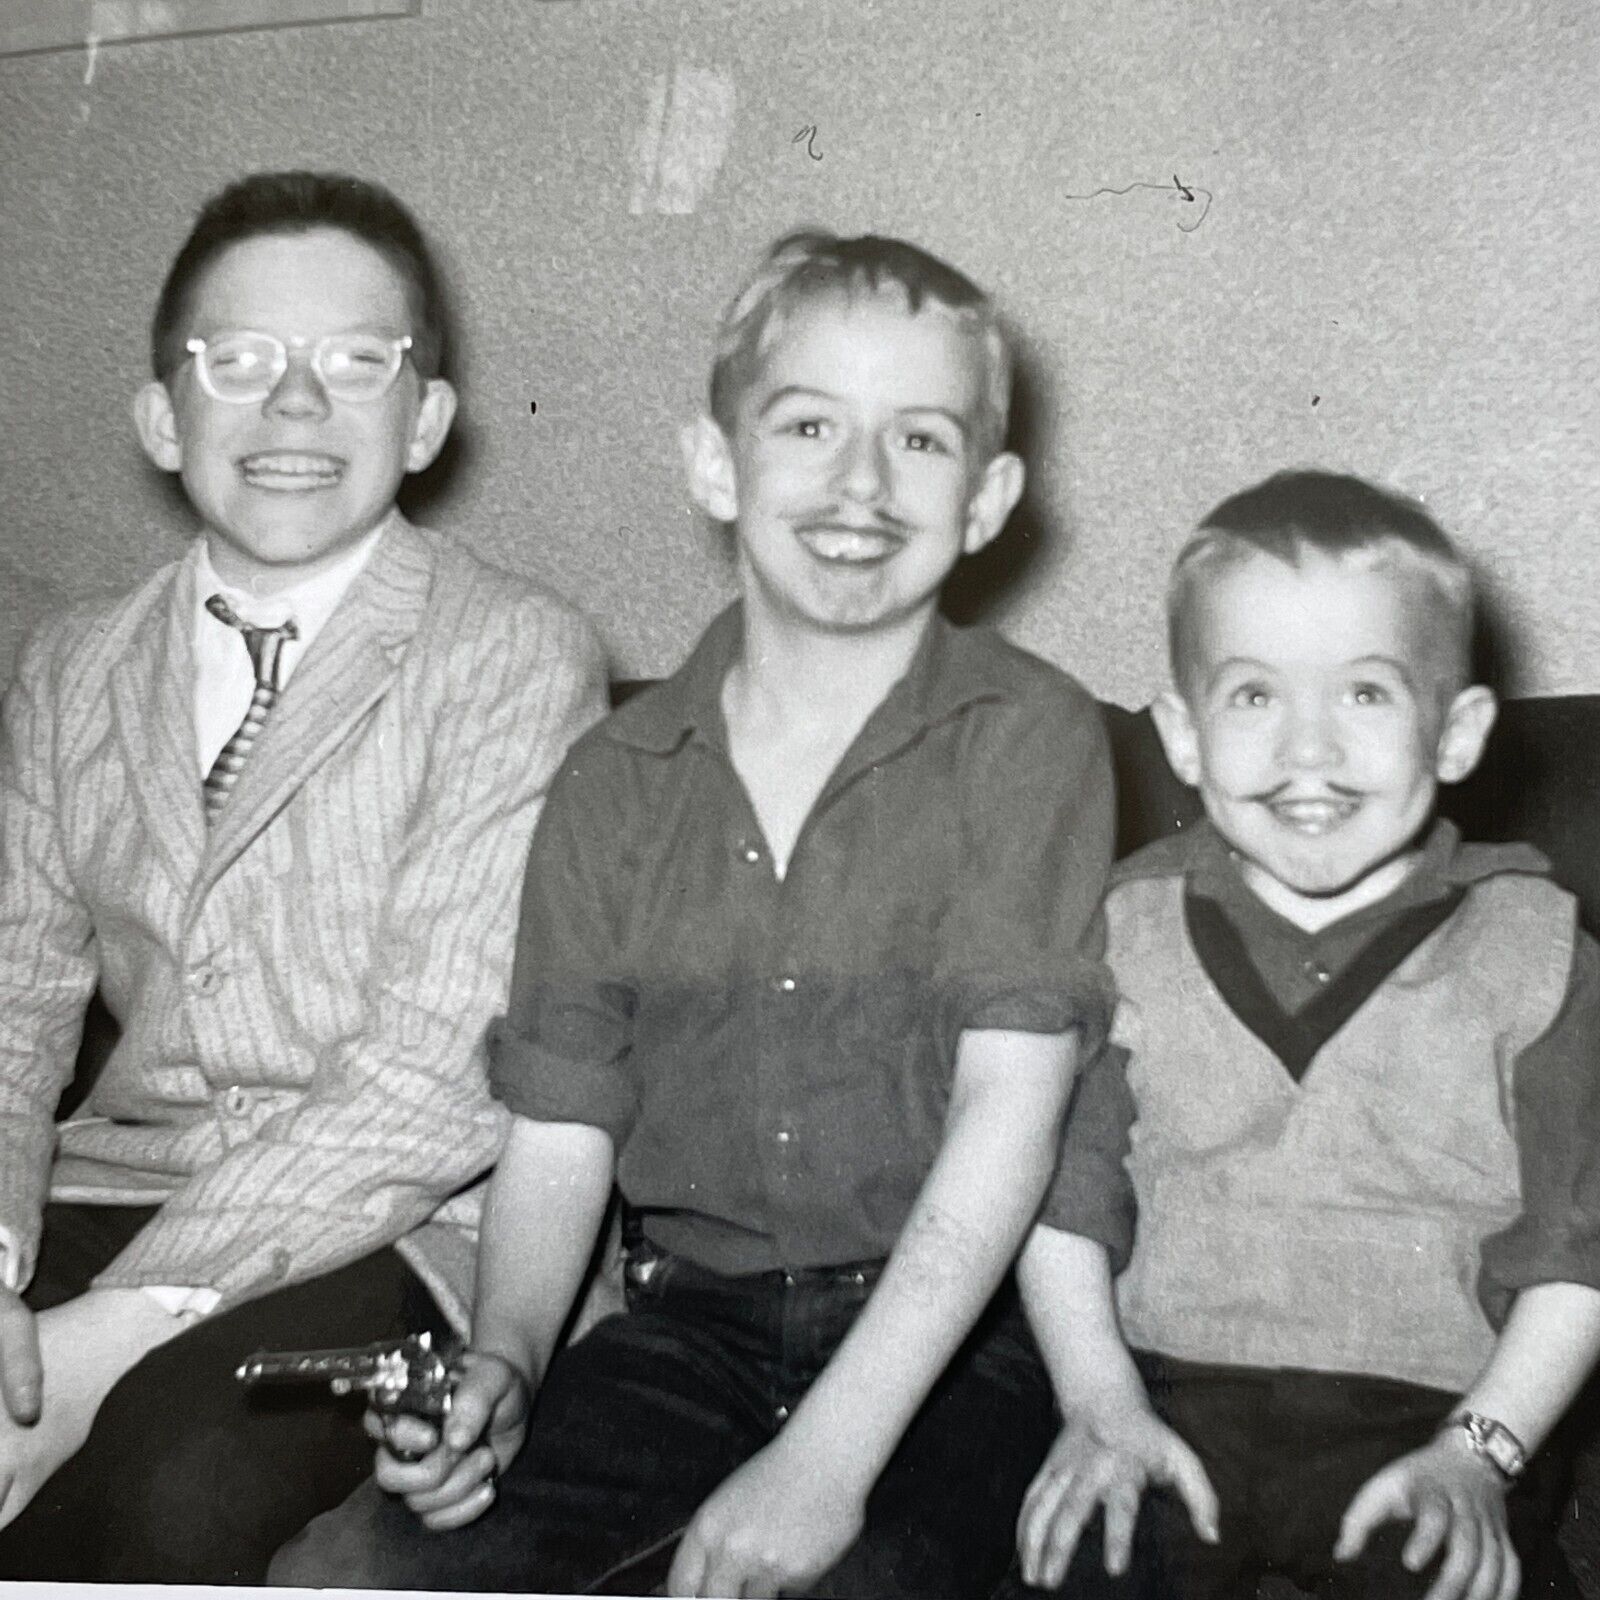 G2 Photograph Boys Drawn On Mustaches Funny Happy Kids 950's